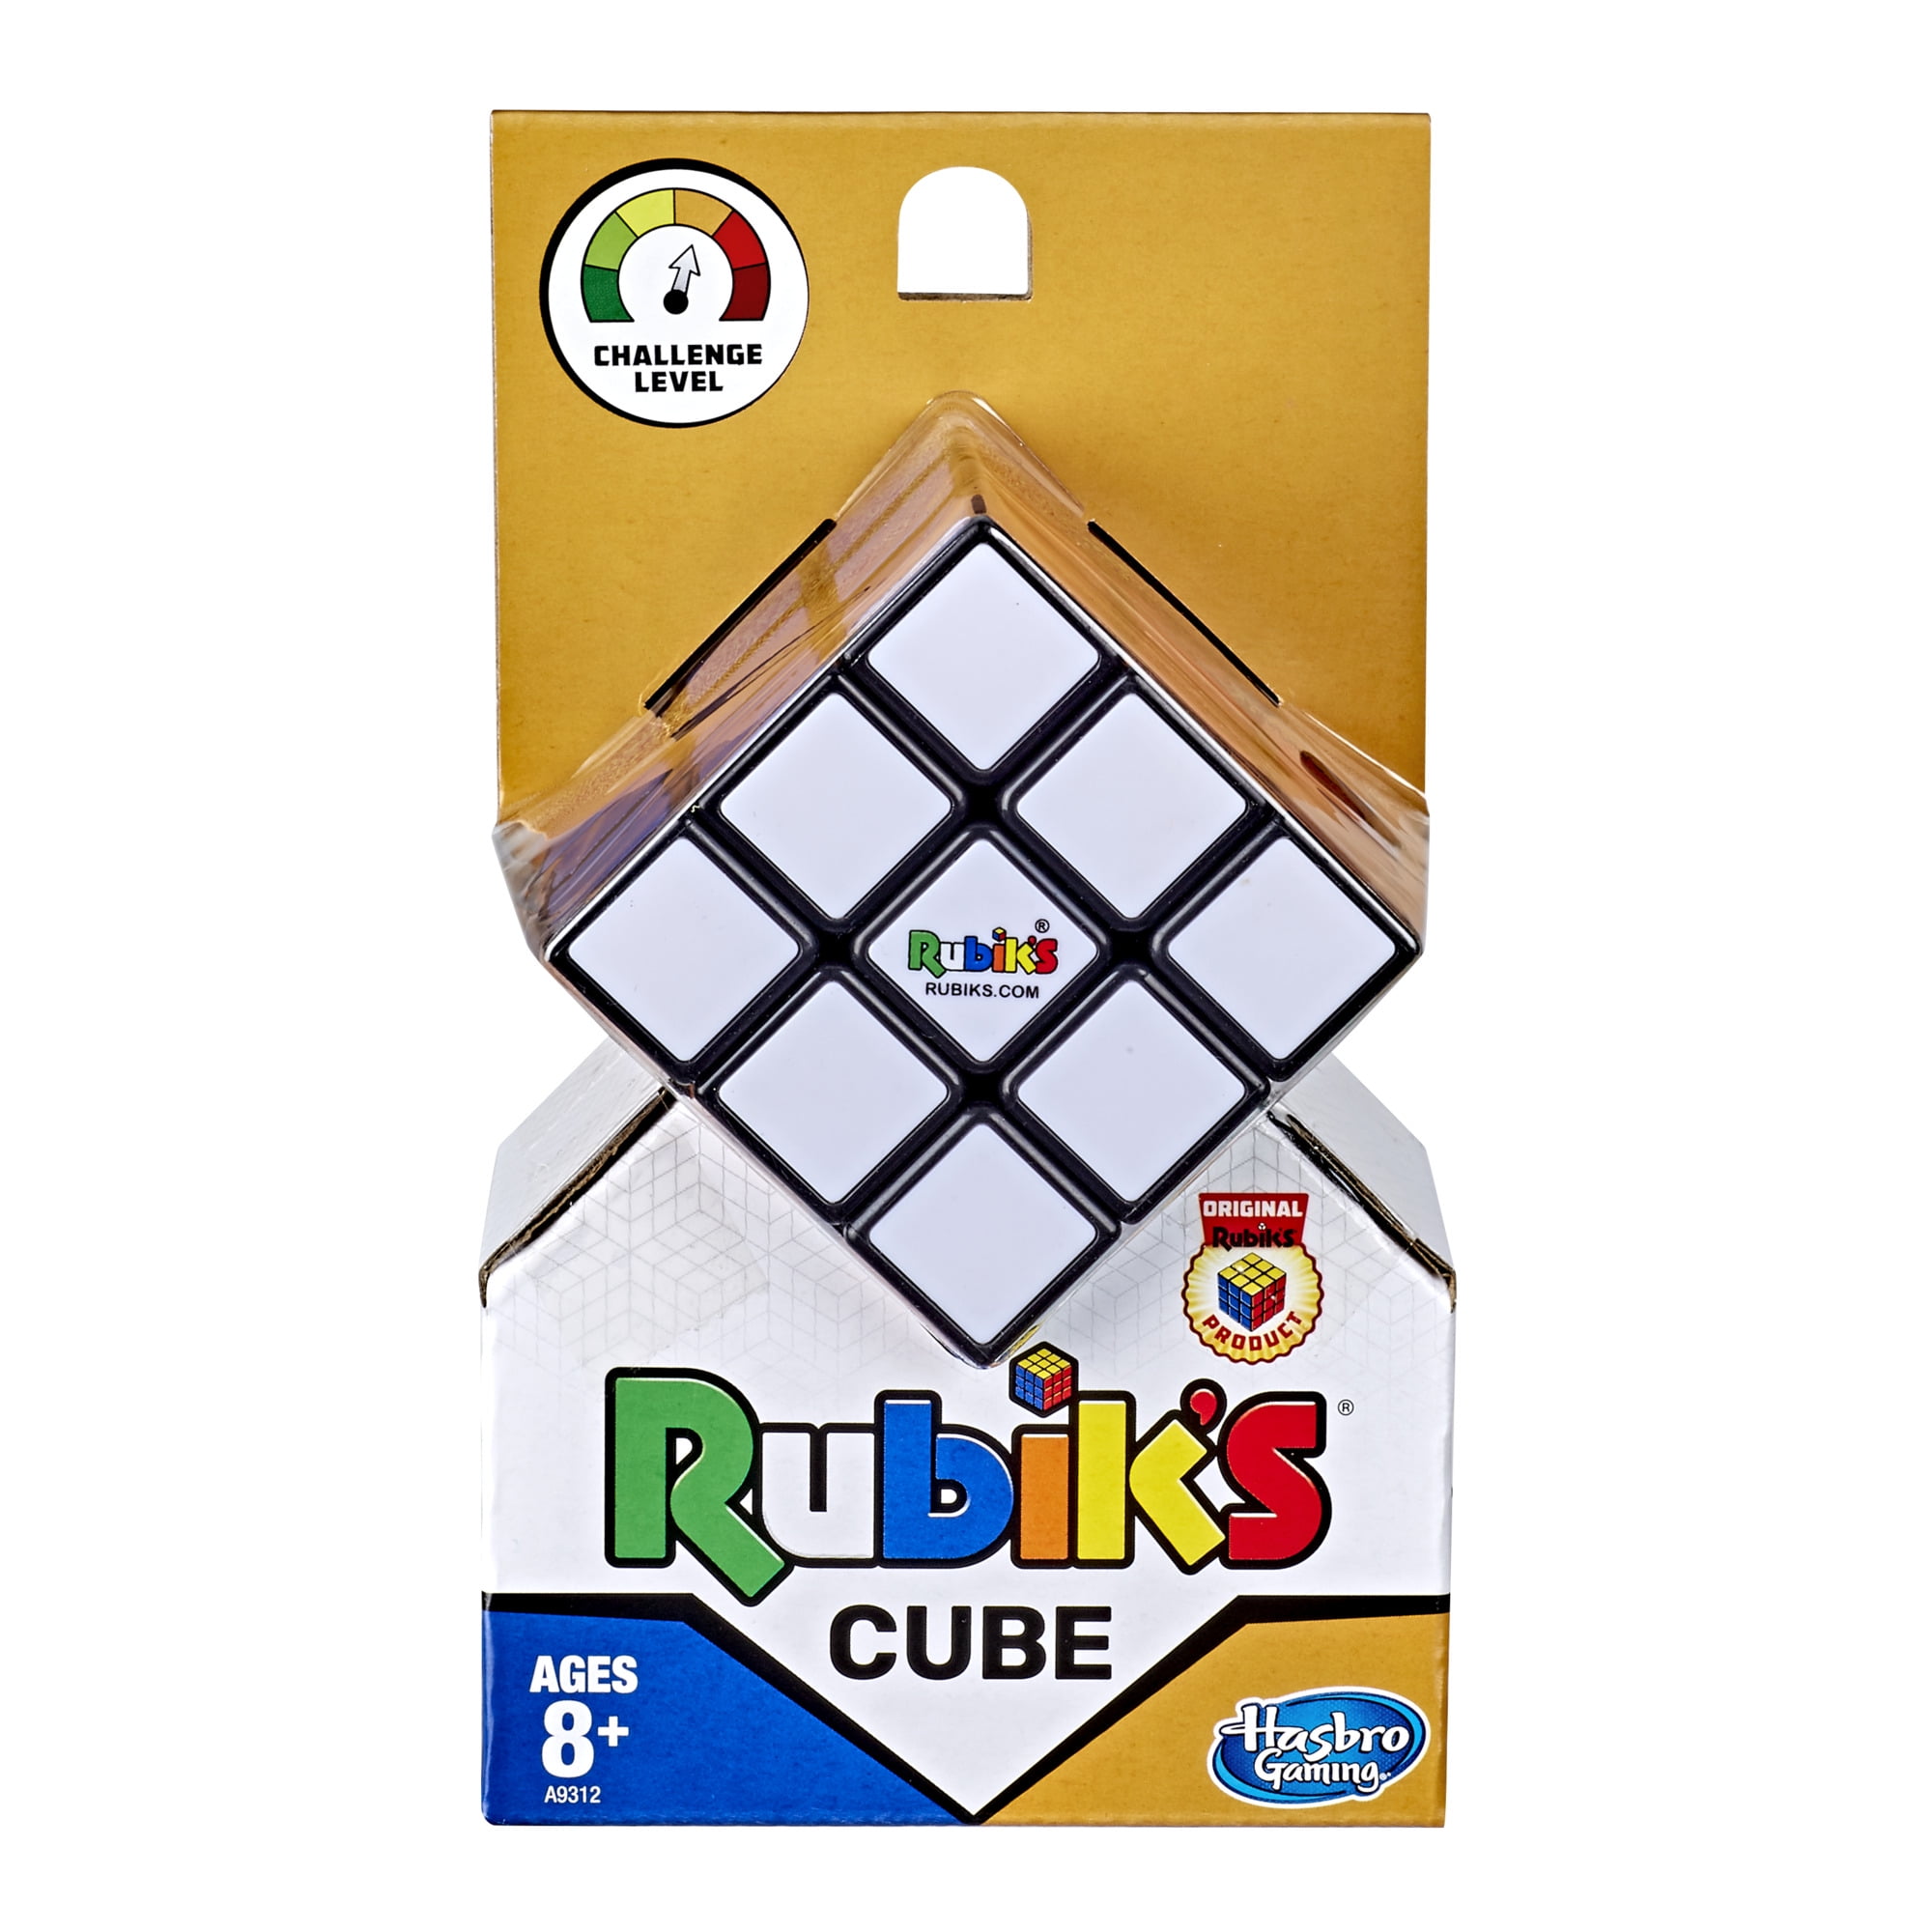 CUBE PUZZLE TOY 3x3 MIND GAME PUZZLE NOT RUBIK 